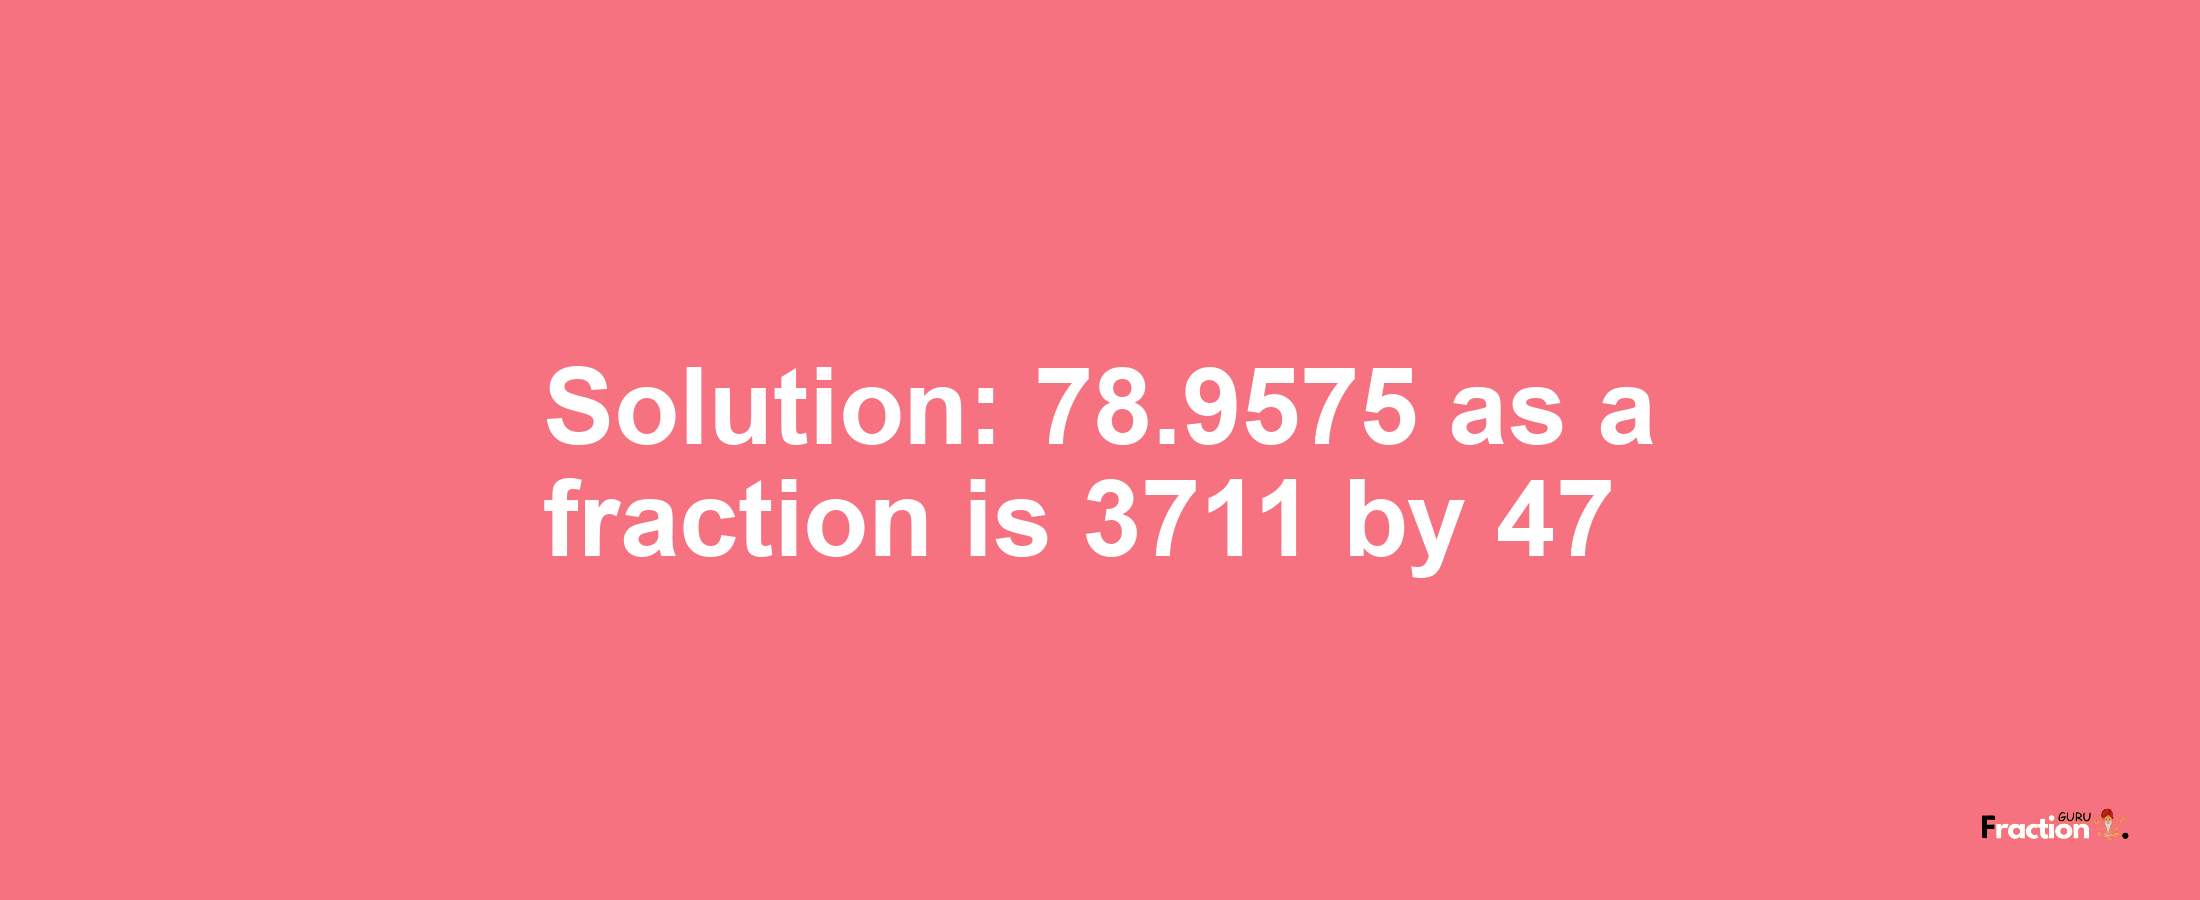 Solution:78.9575 as a fraction is 3711/47